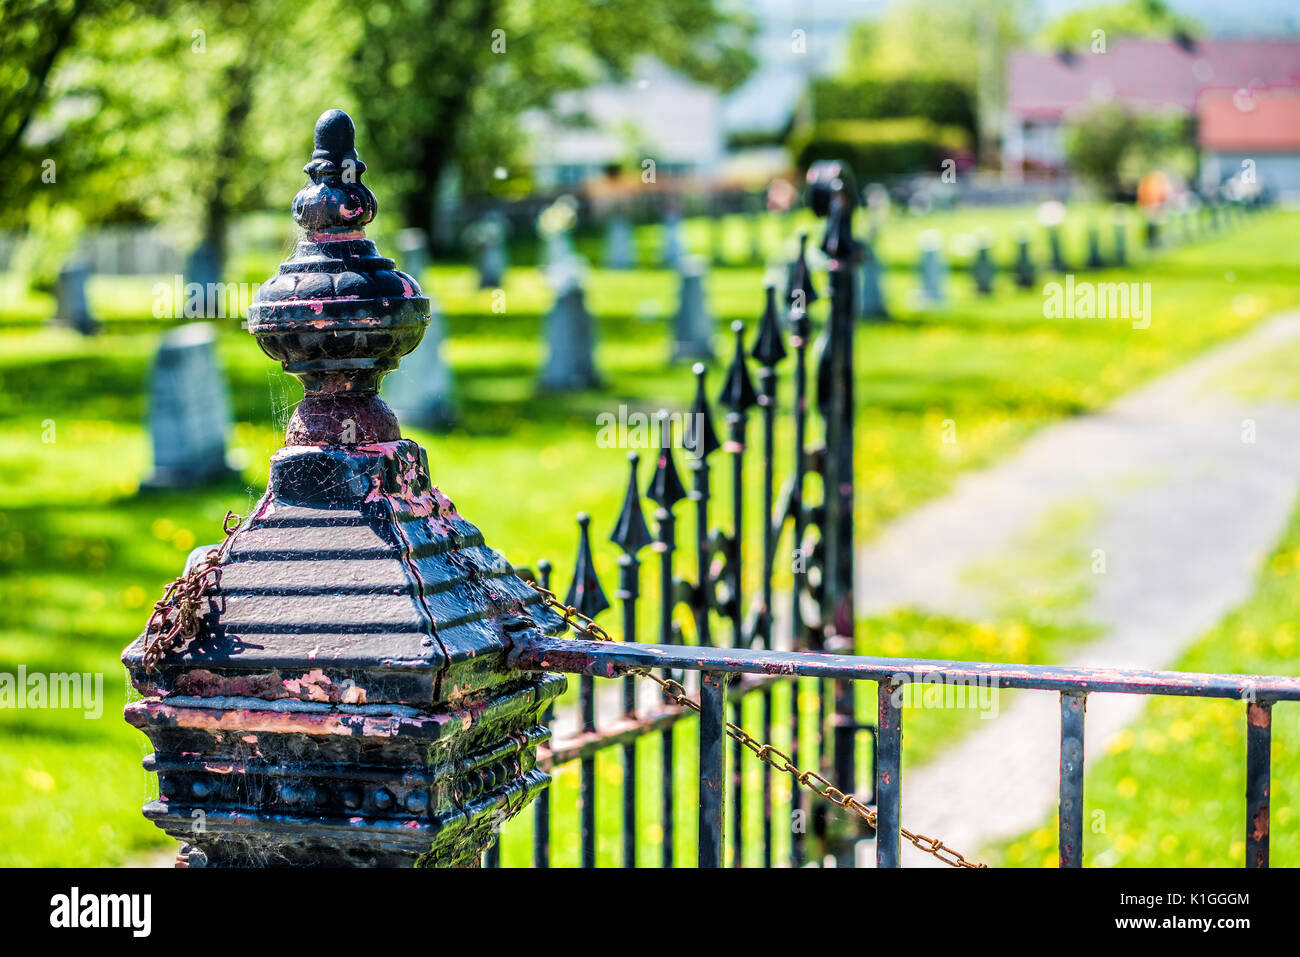 Cemetery and gravestones in summer with vintage metal railing gate fence Stock Photo